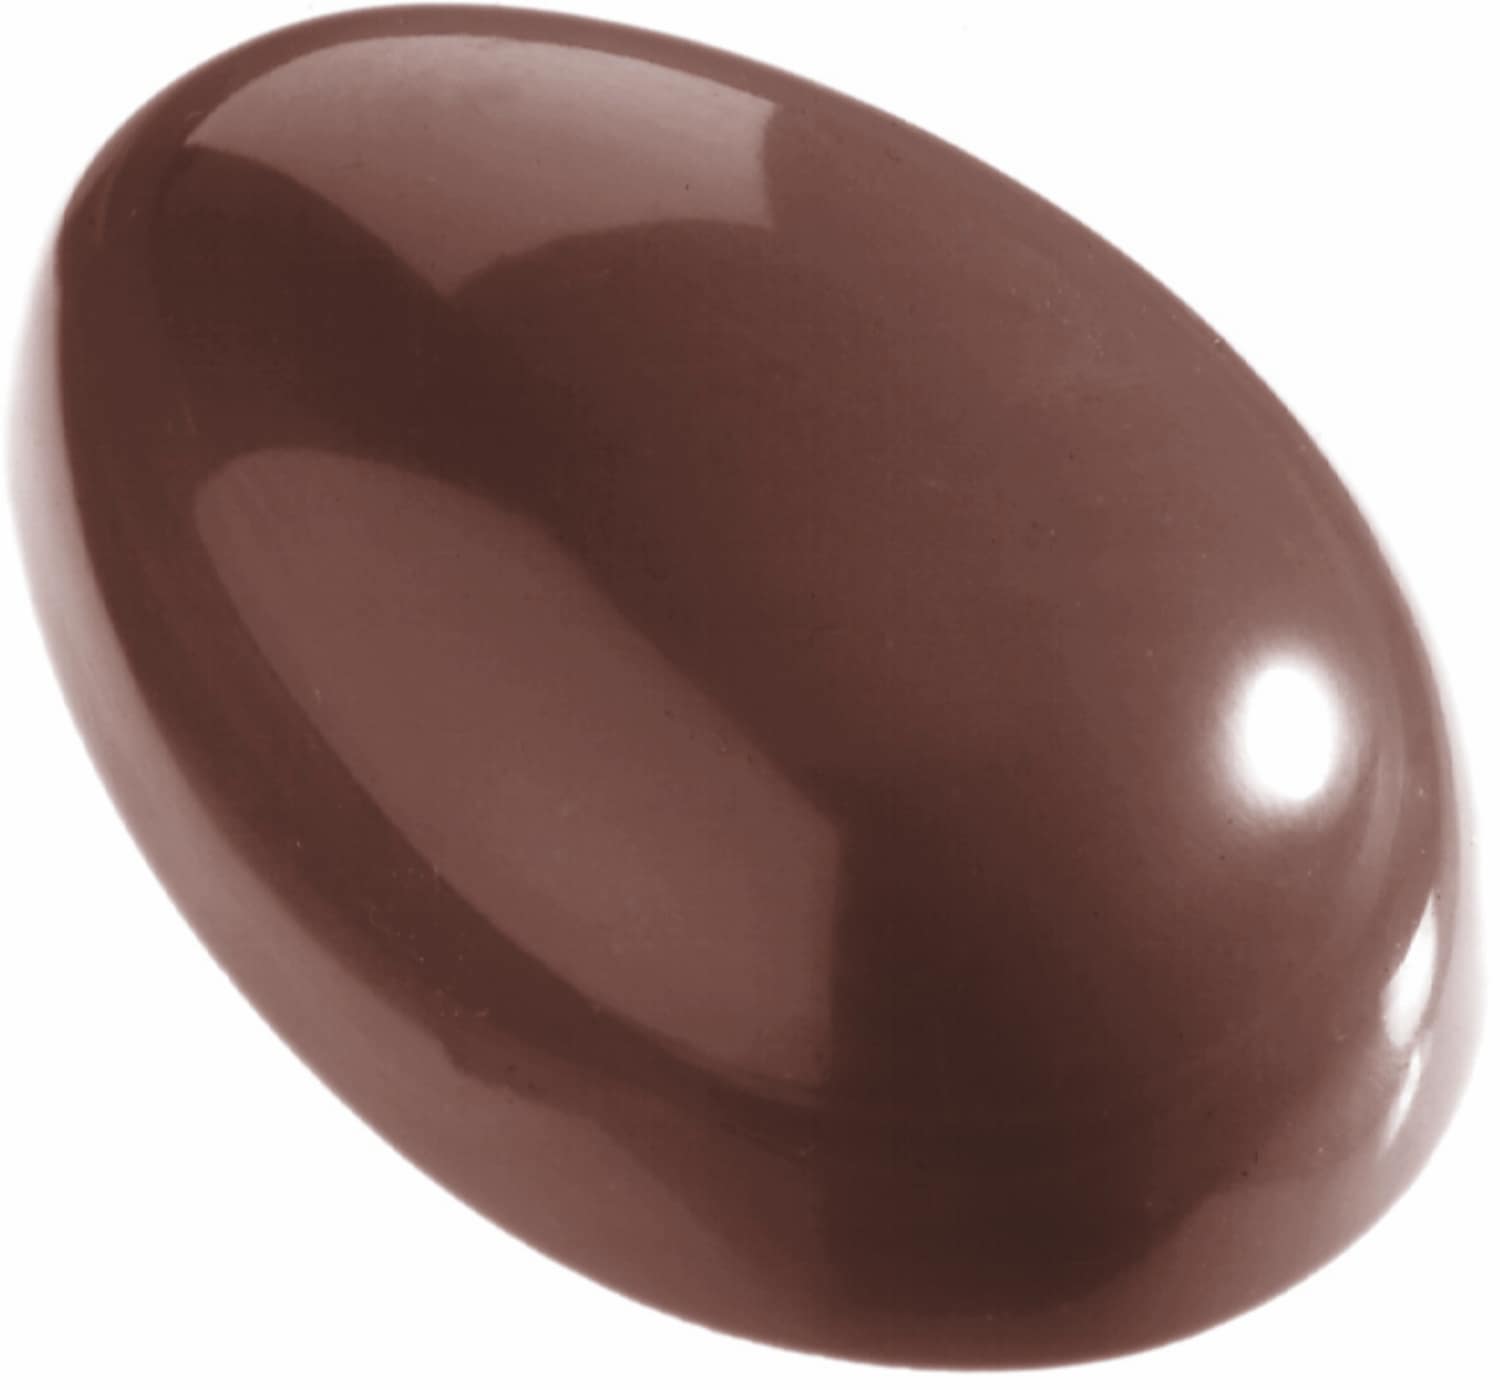 Chocolate mould "Easter egg" 421254